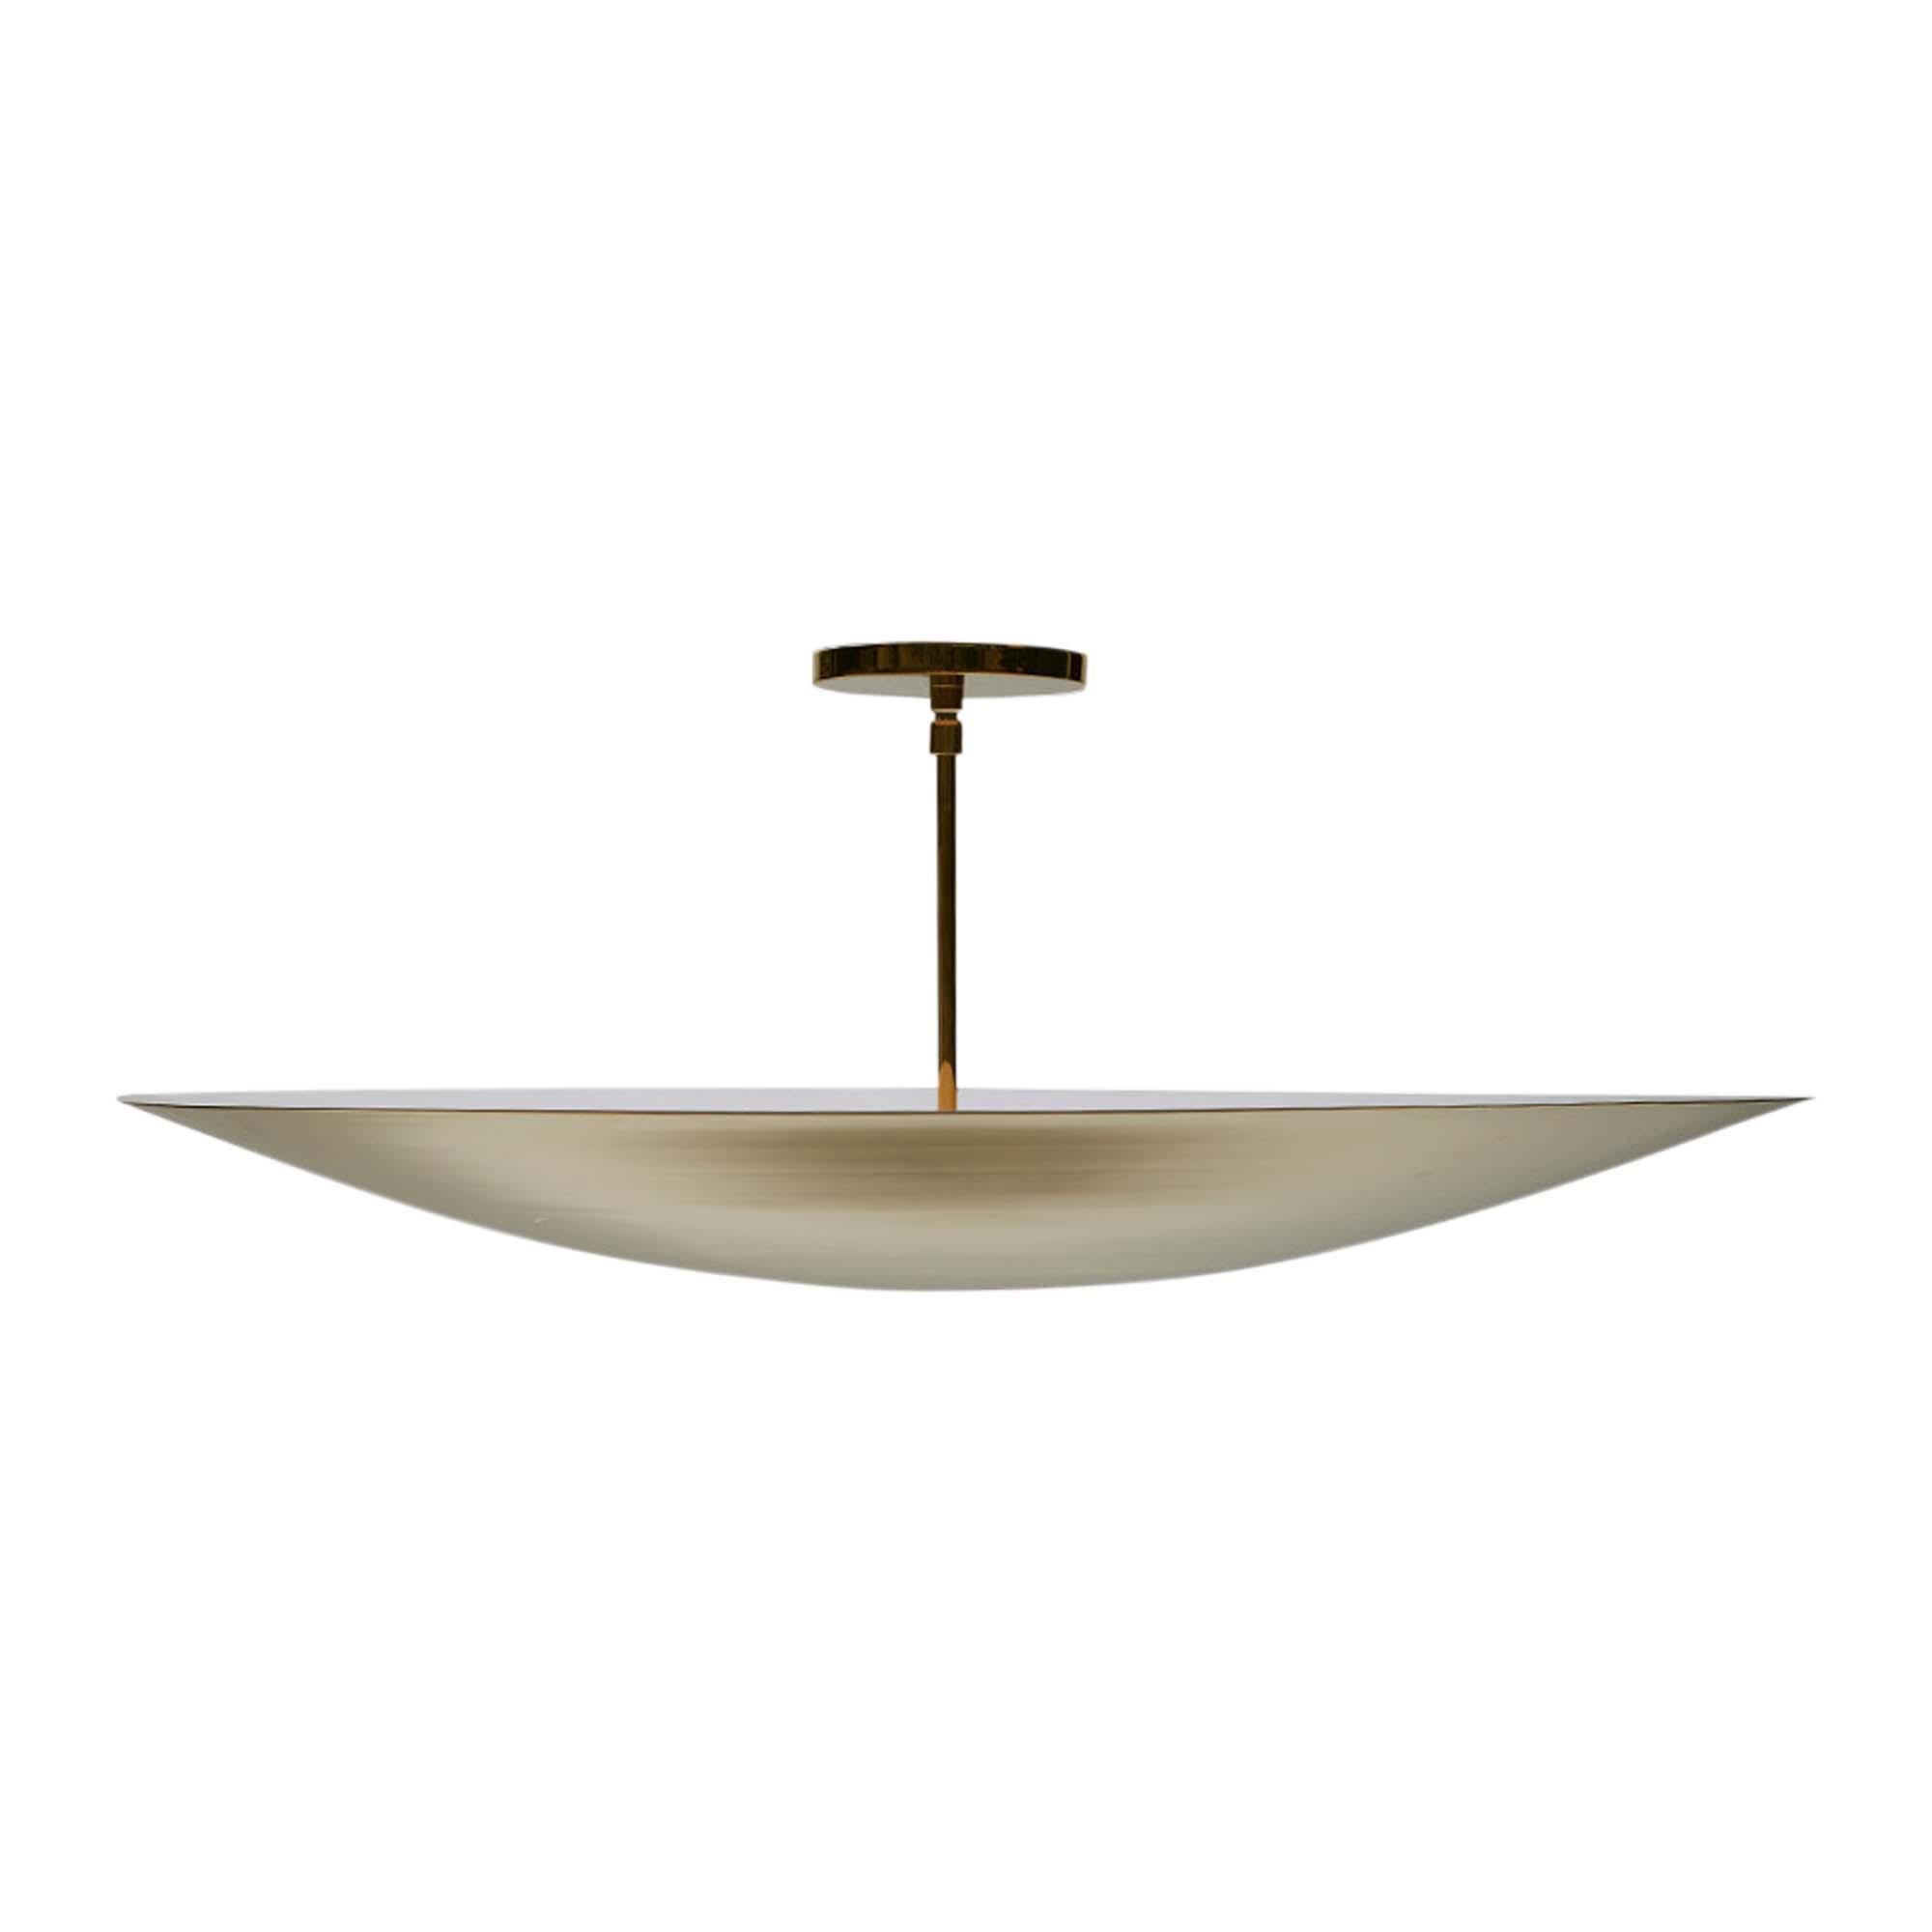 The Alta brass dome features a spun metal shade with a brass canopy and rod. The shade is available in brass or powdercoated metal finishes. Shown here in satin brass. 

The Lawson-Fenning Collection is designed and handmade in Los Angeles,